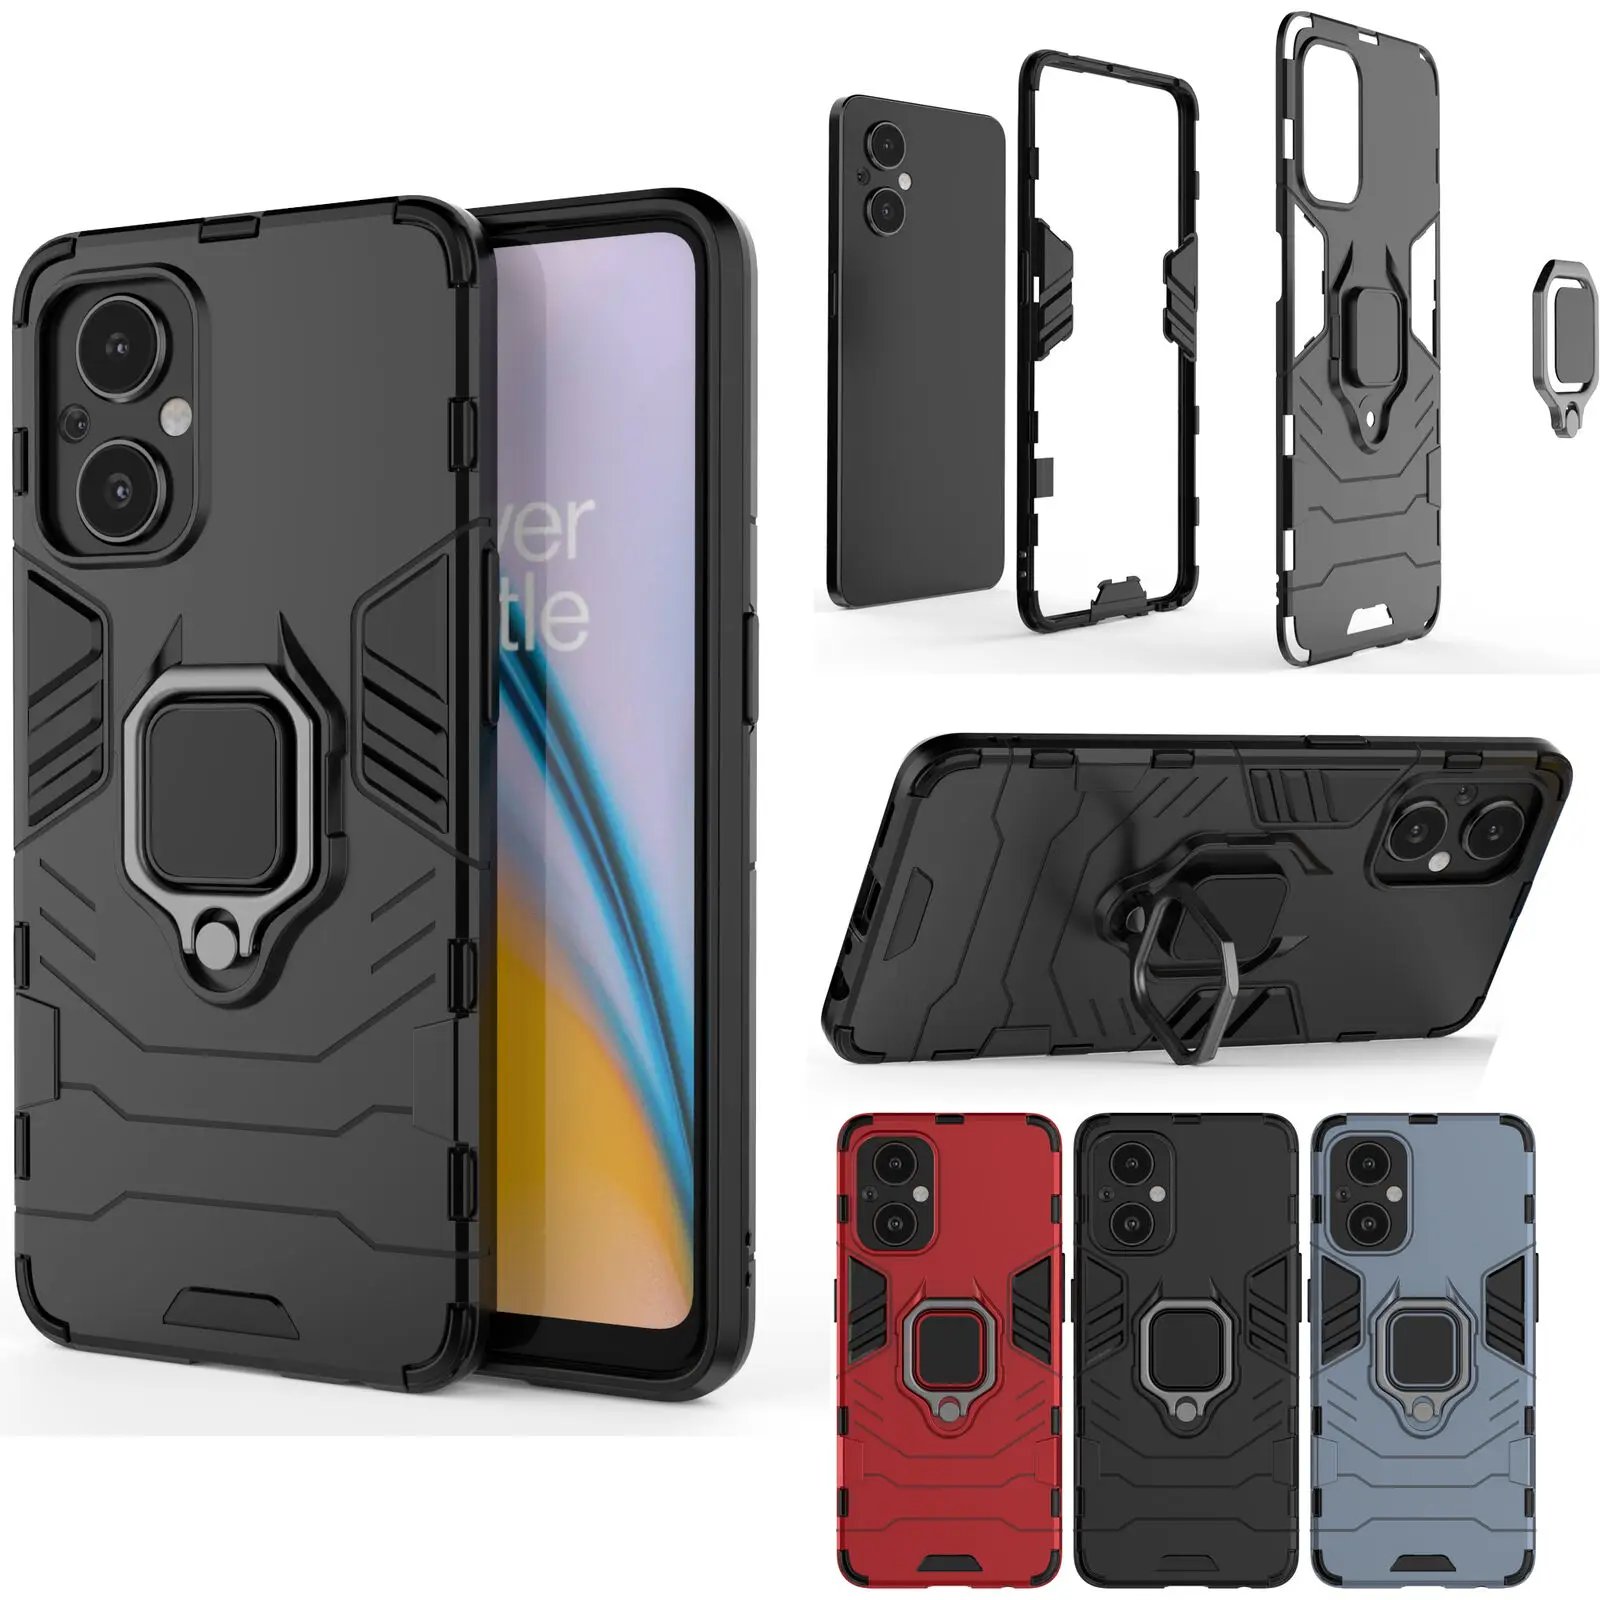 

Armor Protective Magnetic Ring Case Hybrid Stand Cover For Oneplus 5G N20 Shockproof Ring Holder Rugged Armor Hybrid